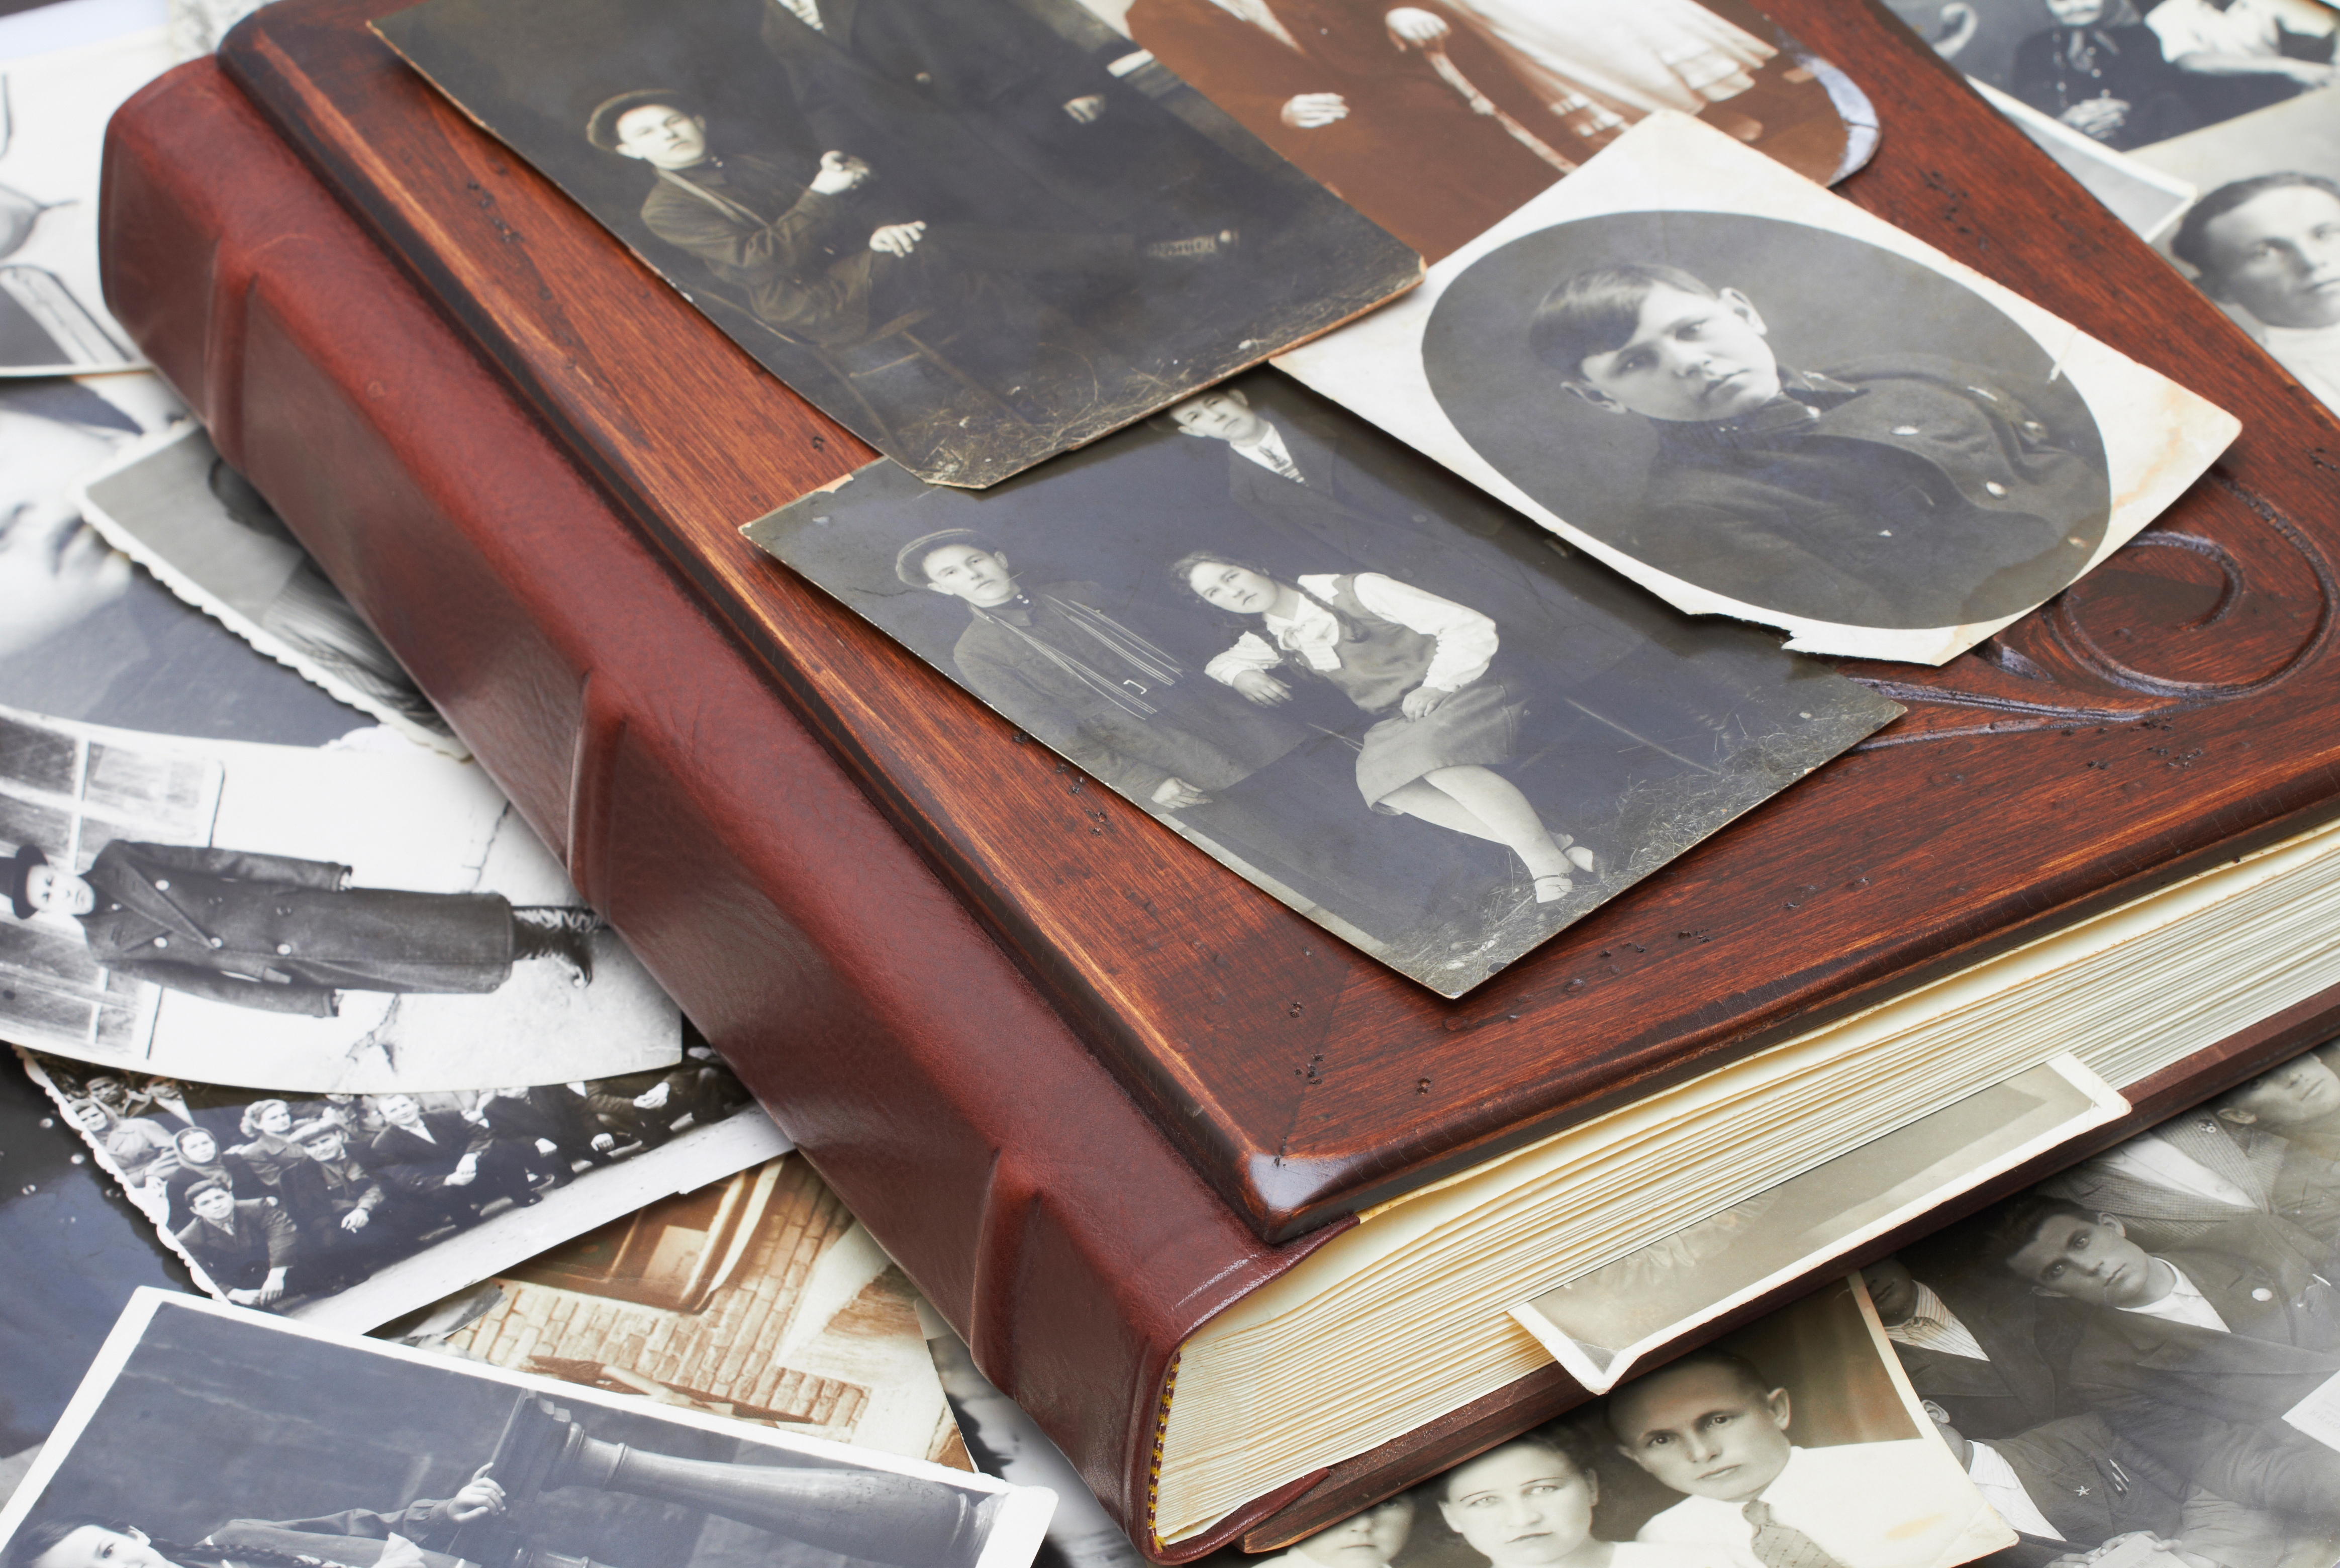 Old photos on the album | Source: Shutterstock